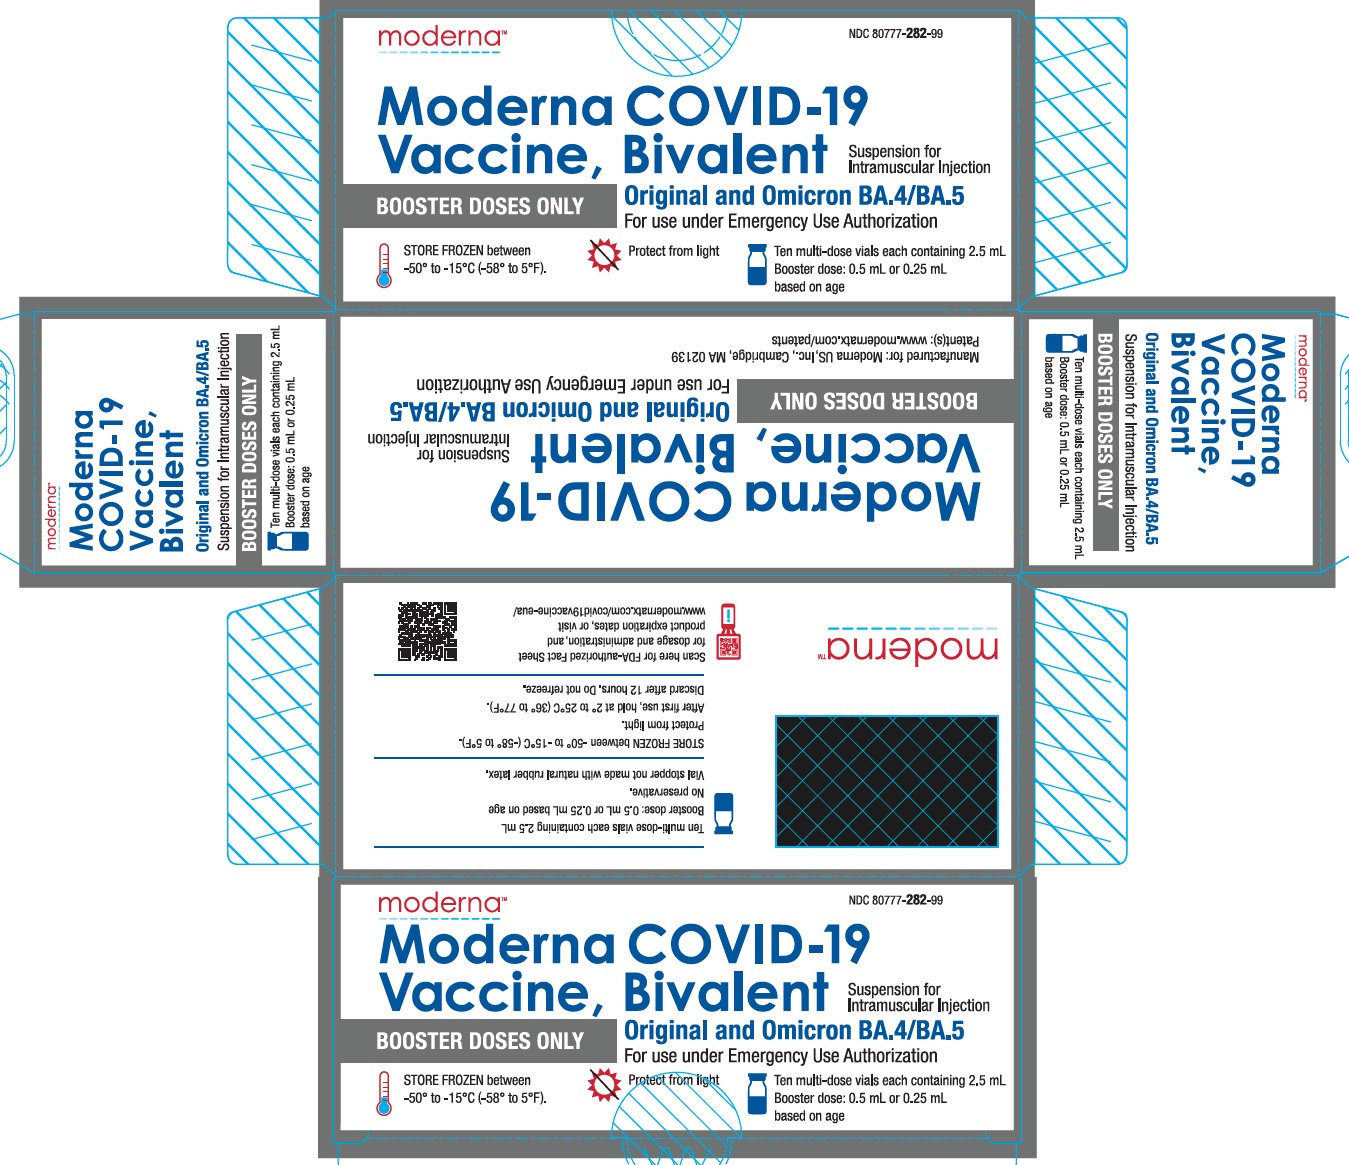 Moderna COVID-19 Vaccine, Bivalent Suspension for Intramuscular Injection for use under Emergency Use Authorization-Booster Doses Only-Carton 2.5 mL